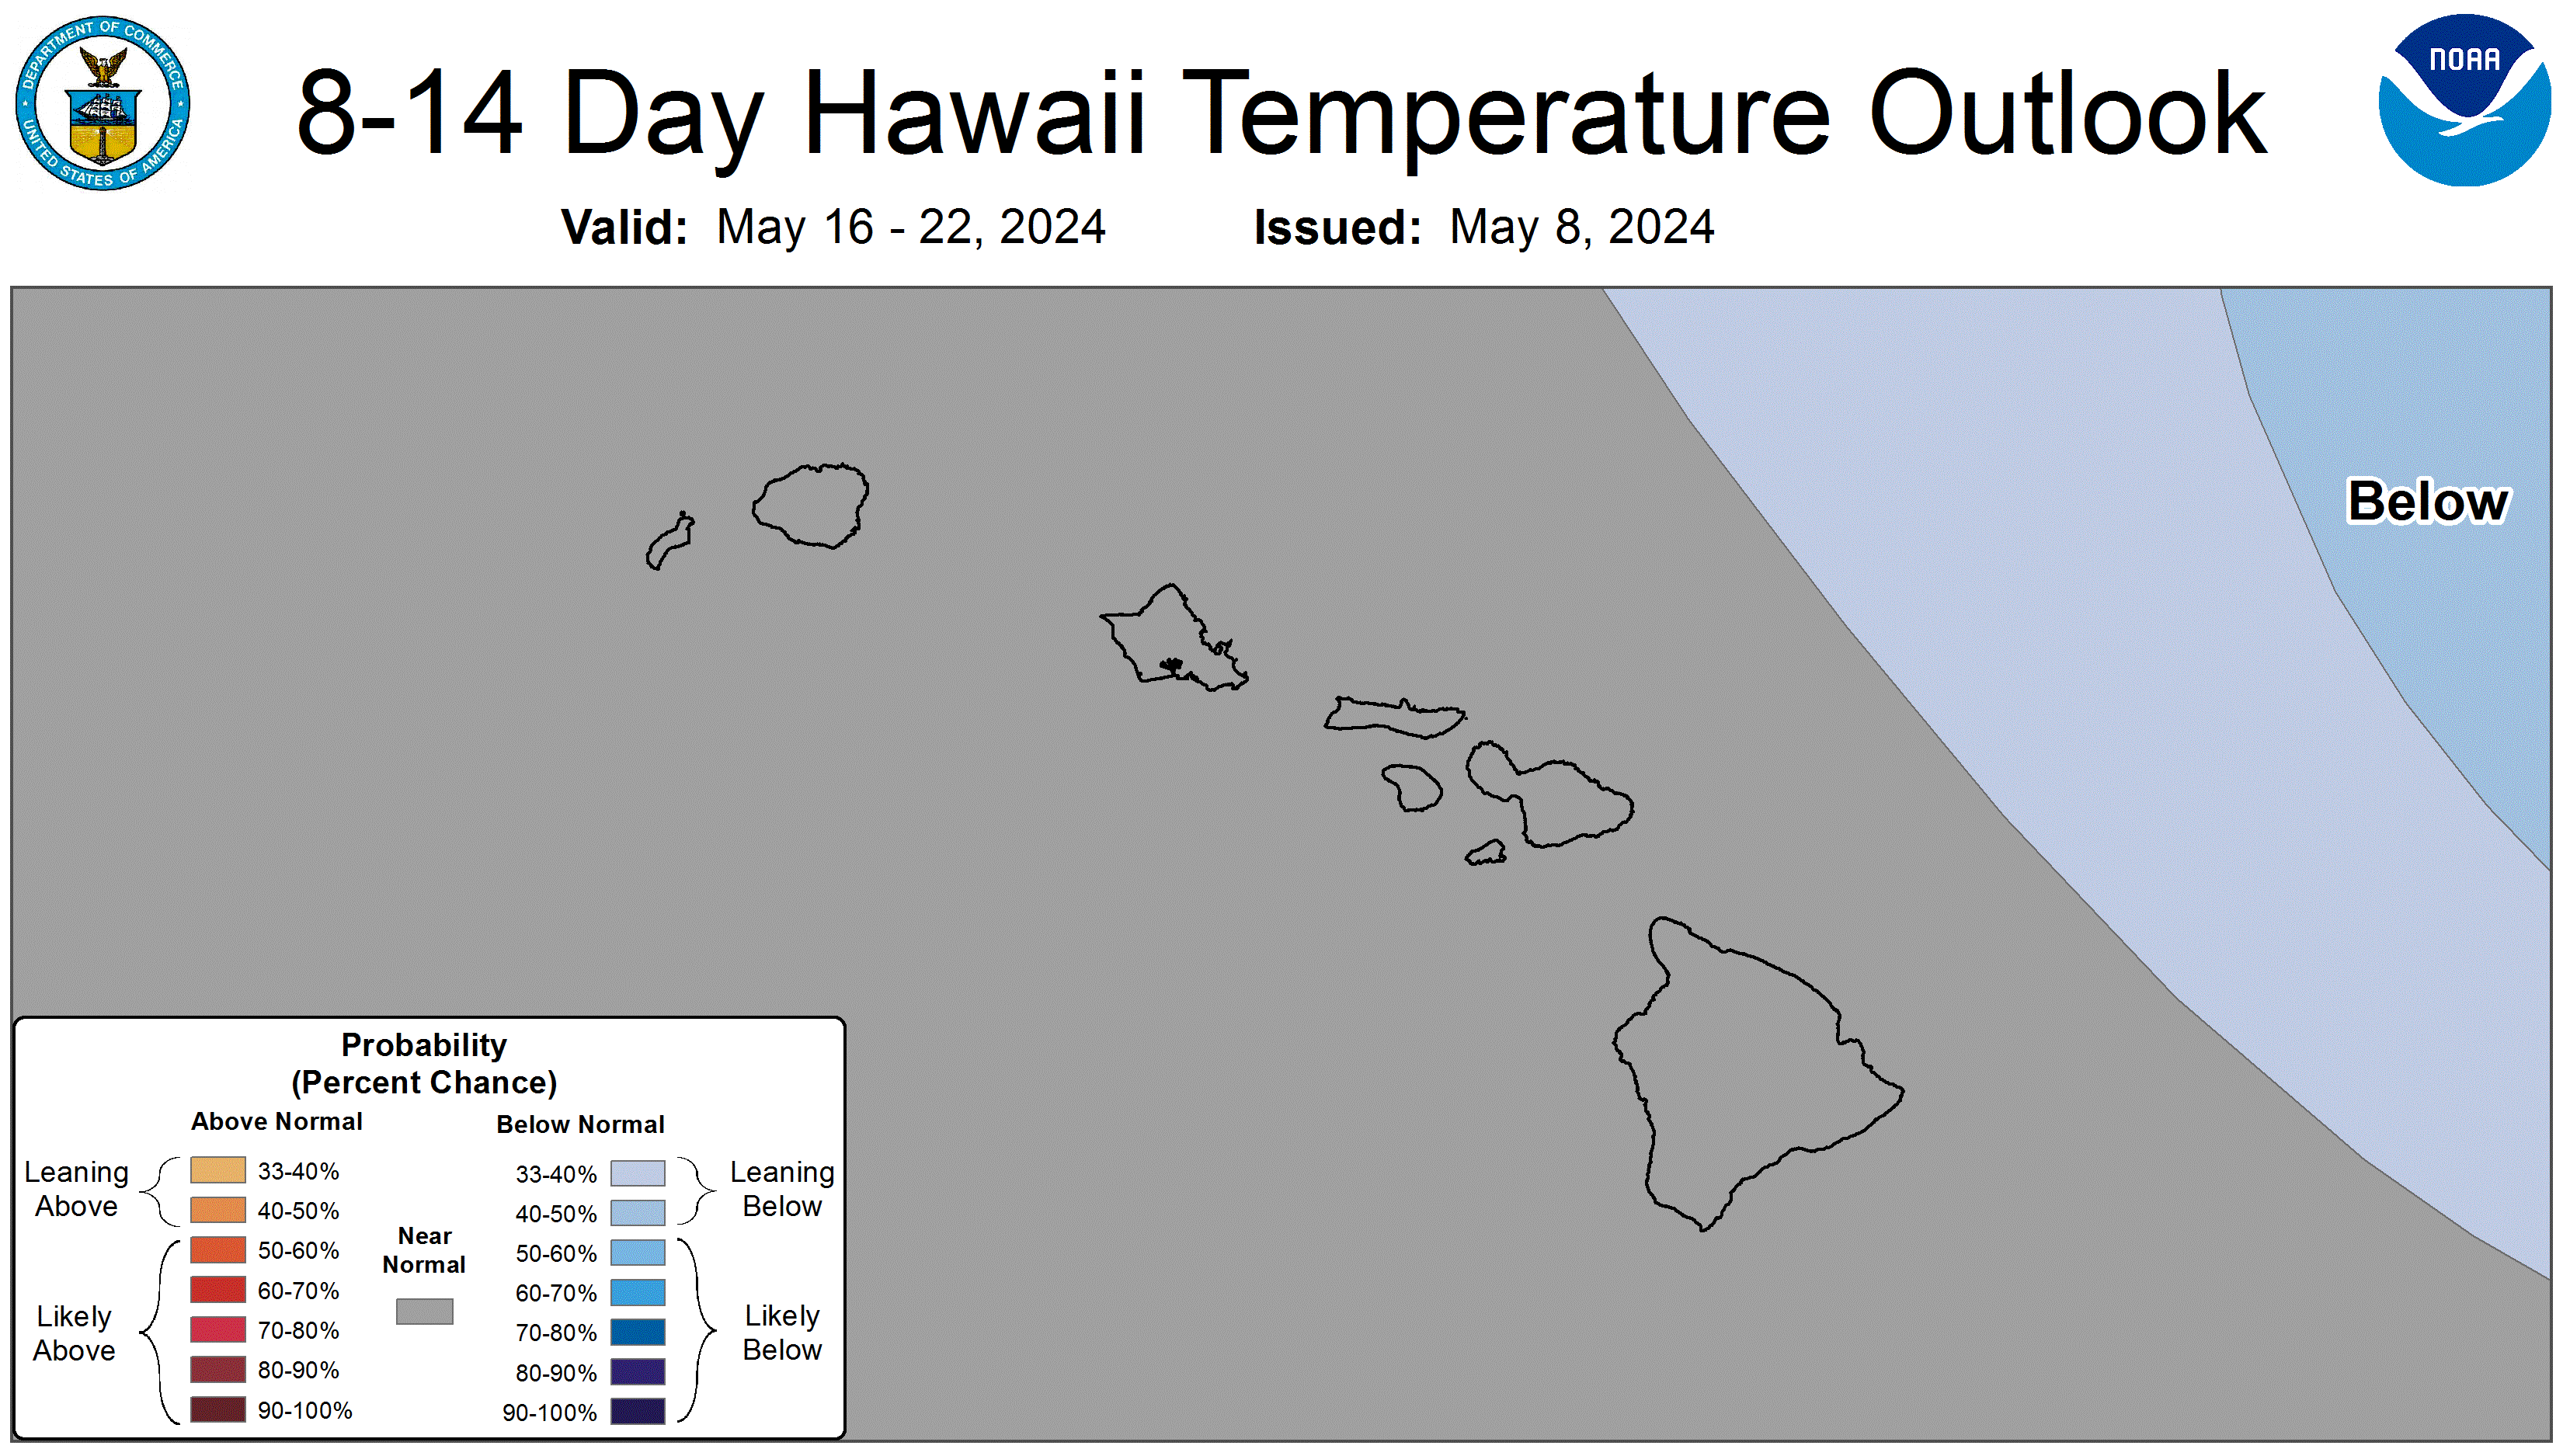 Graphical forecast for the 8 to 14 day temperature forecast. Showing a zoomed in view of the main Hawaiian Islands